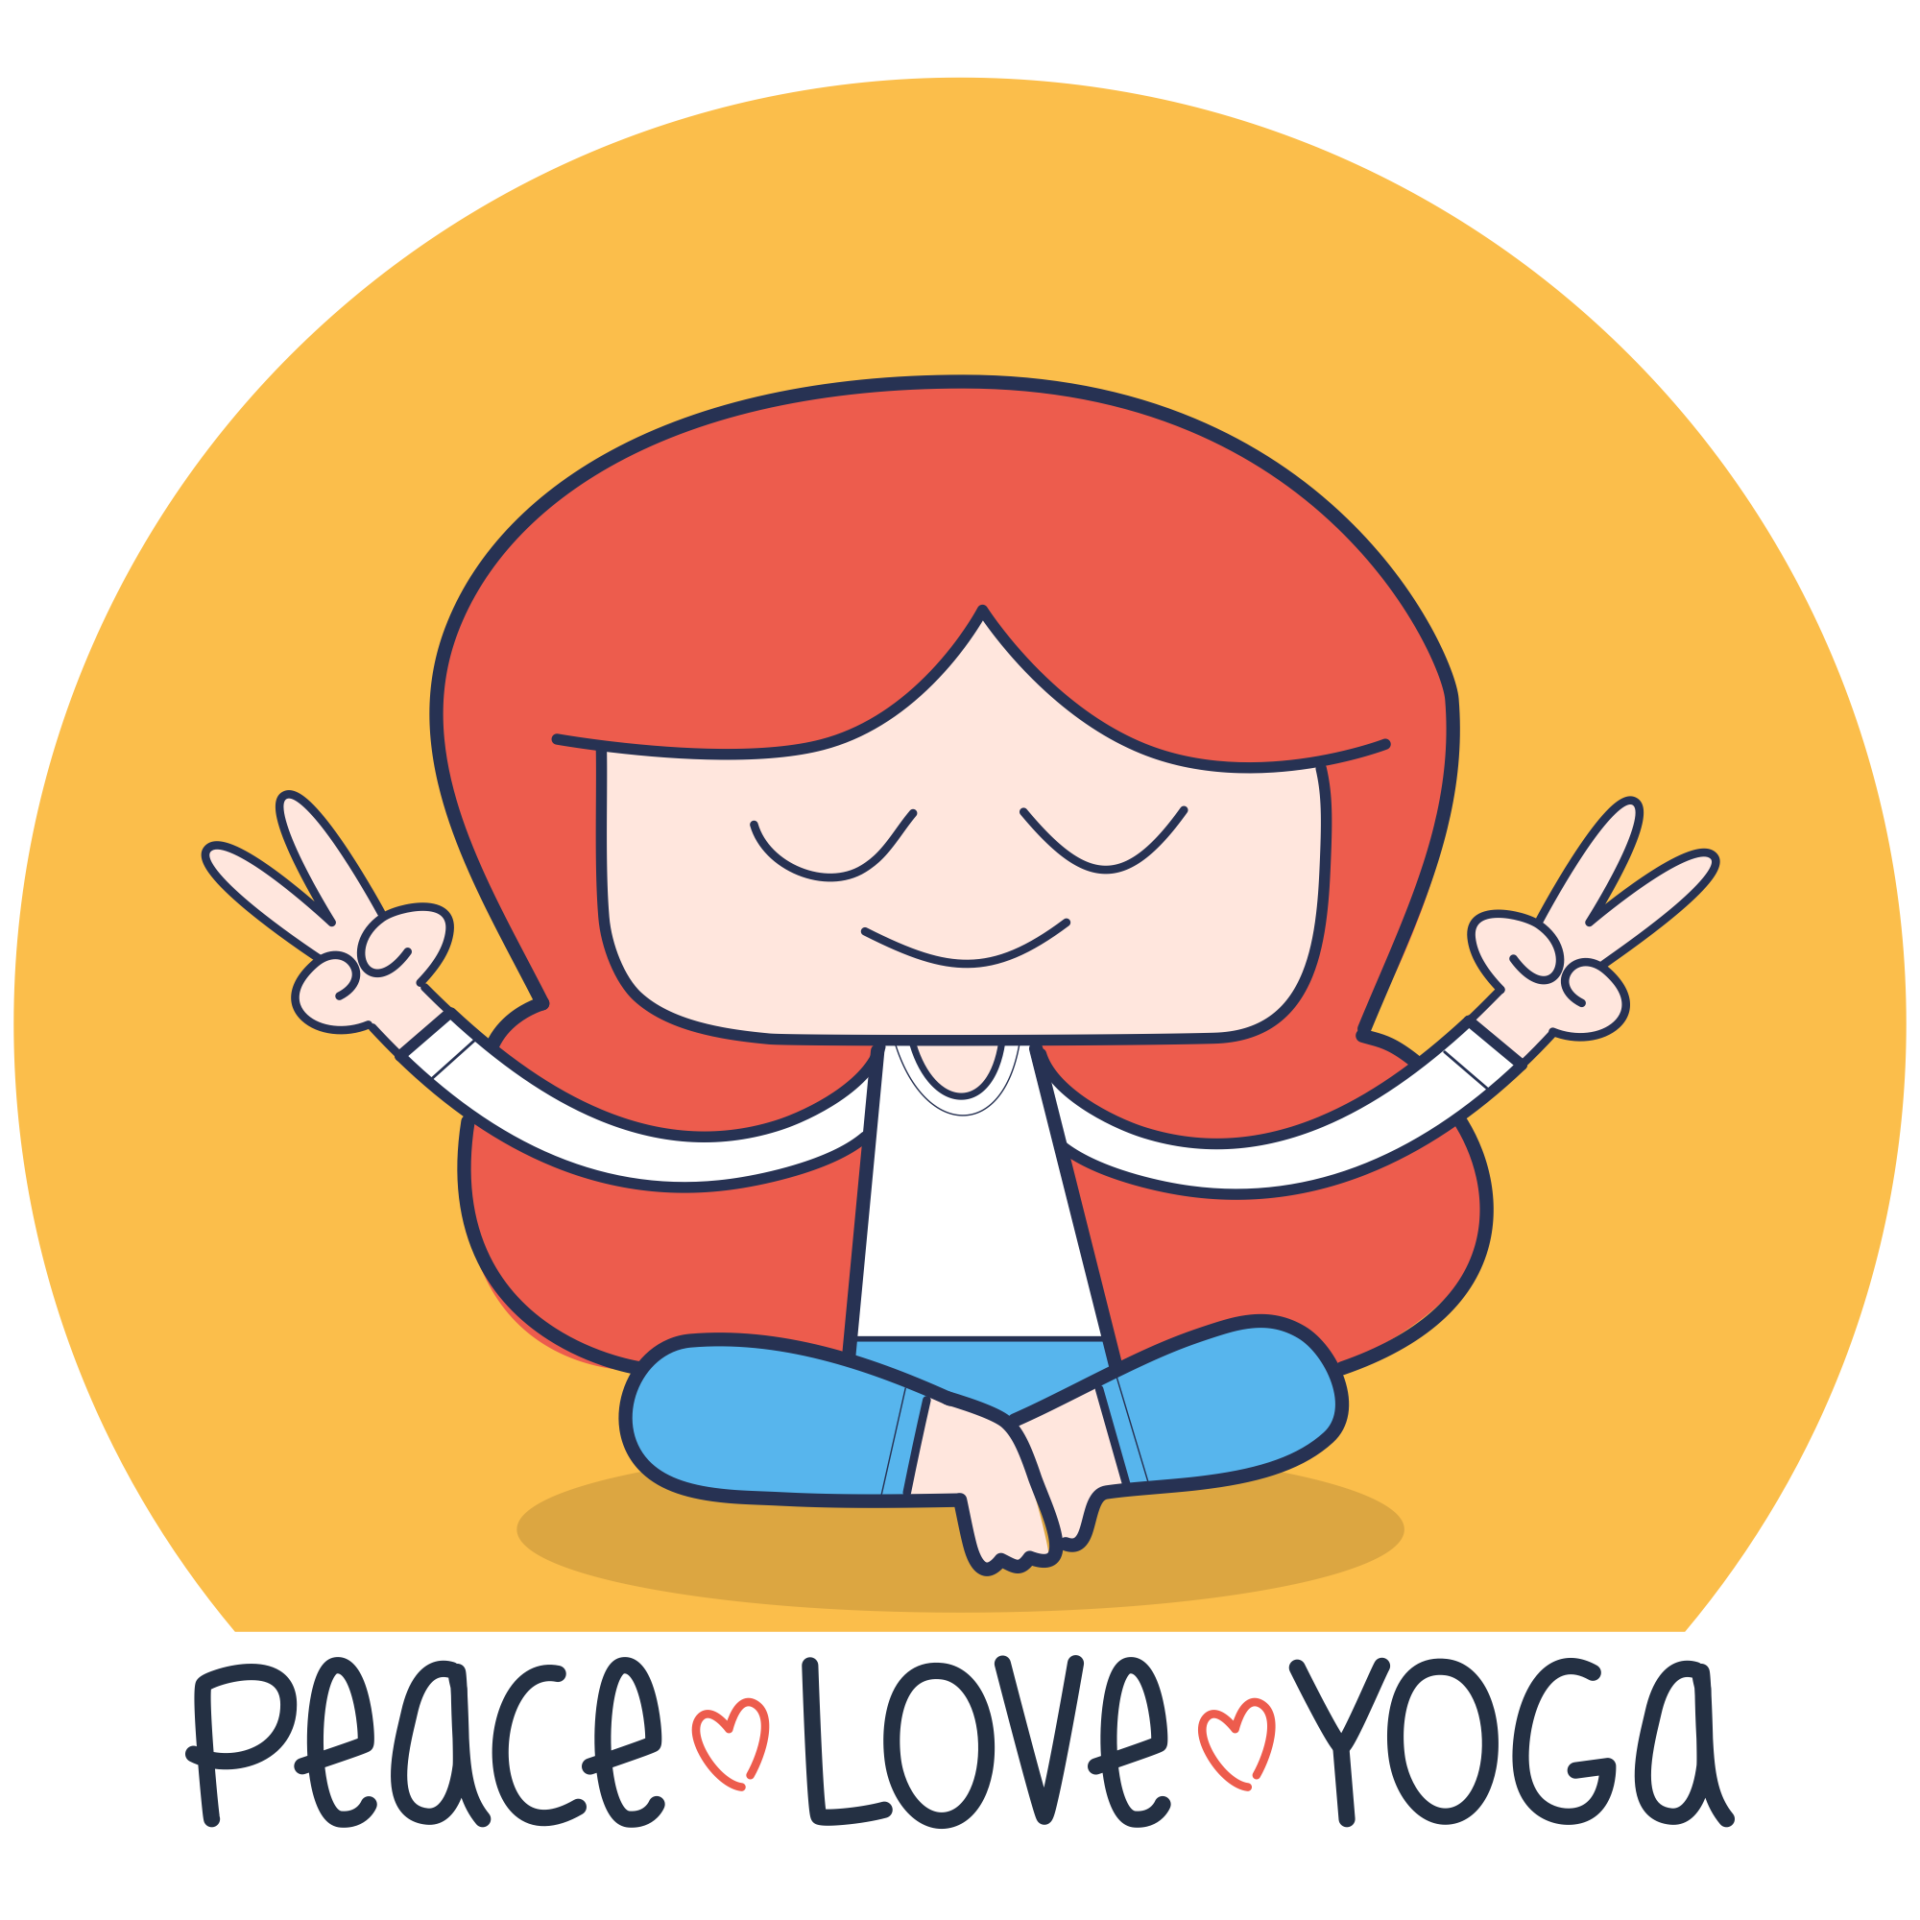 an illustration of a red-haired lady sitting in a yoga pose